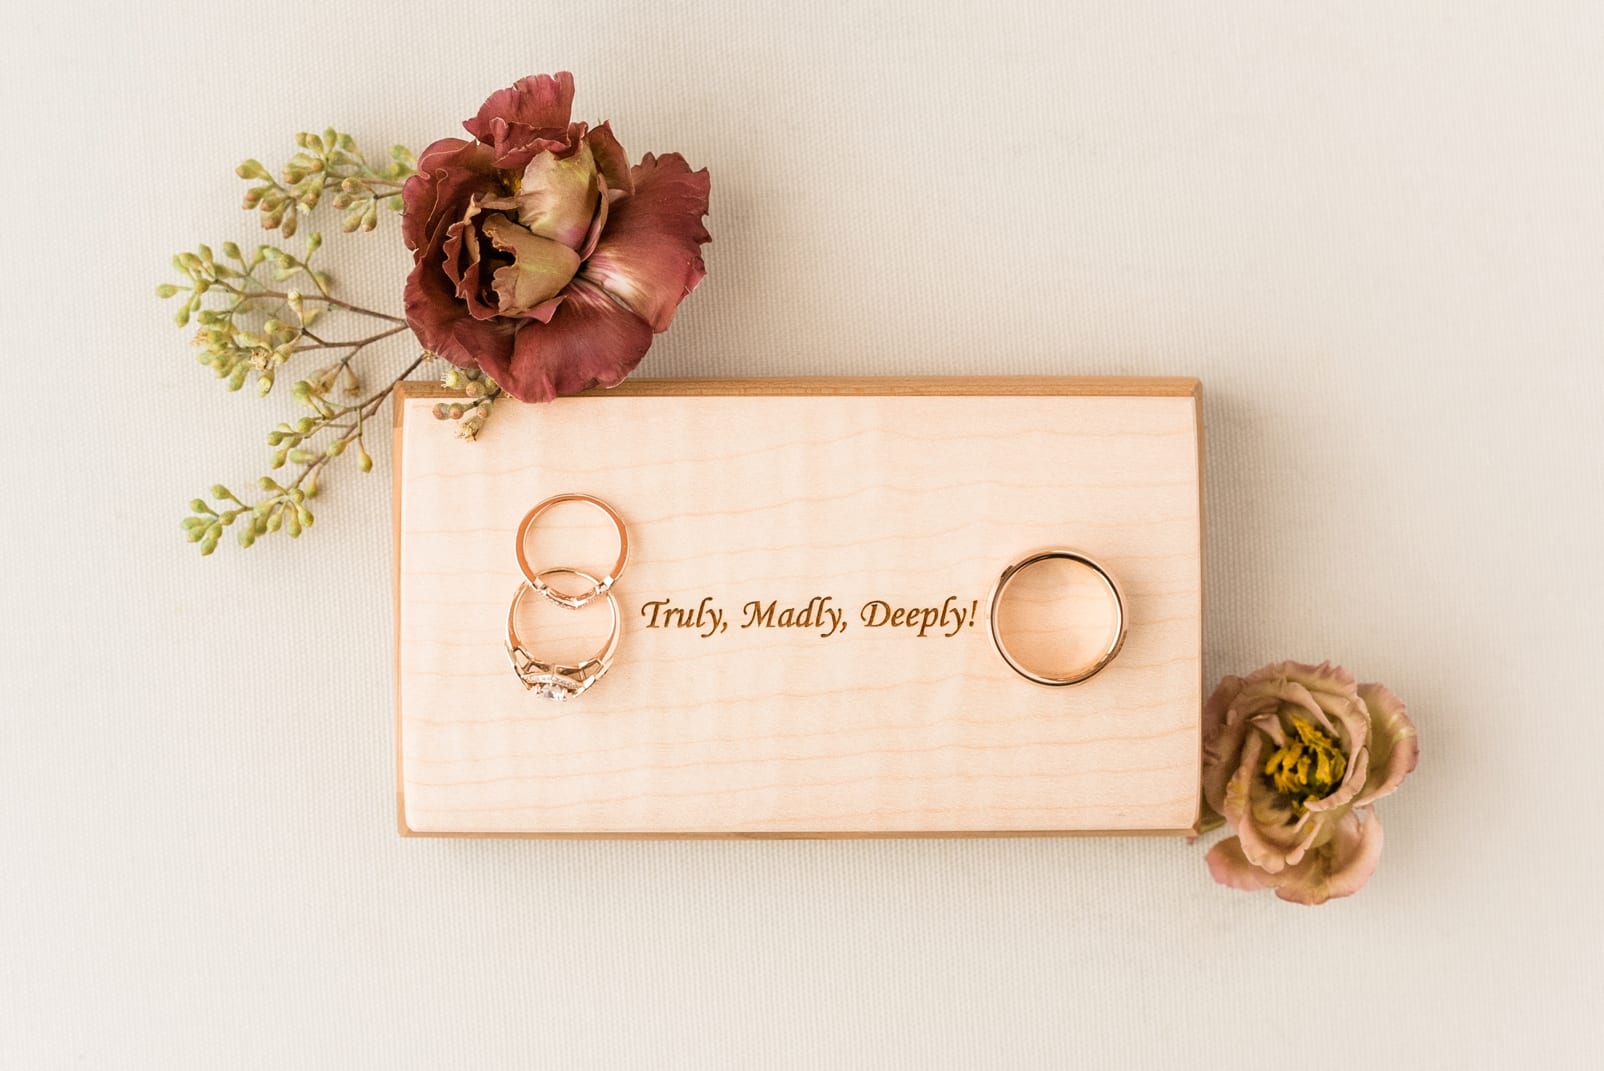 Raleigh wedding bands styled over wooden ring box carved with their names photo